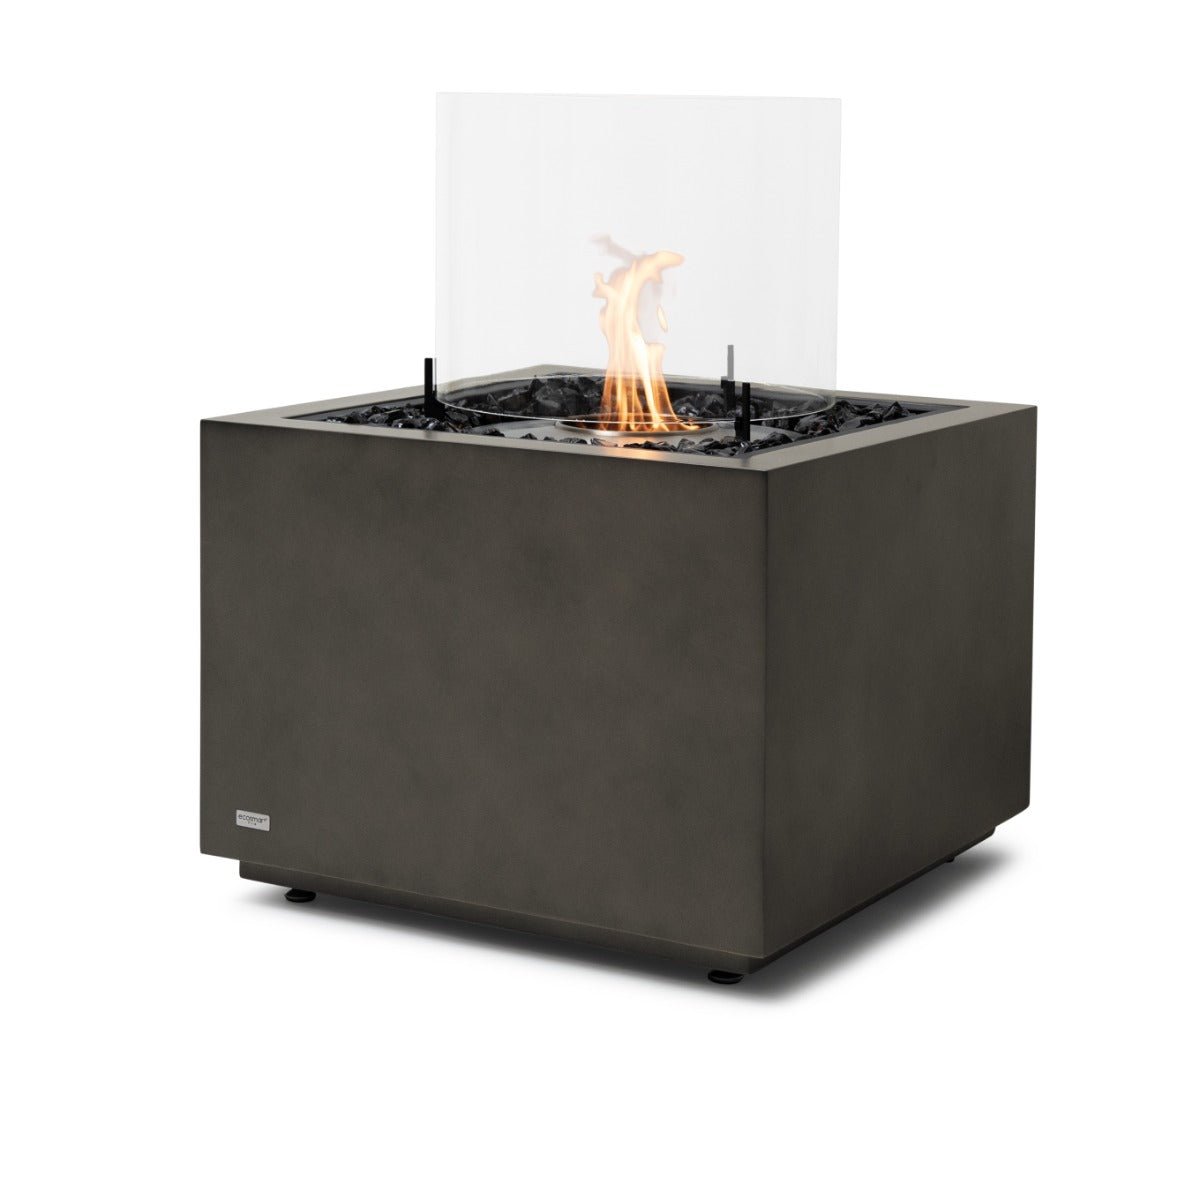 EcoSmart Sidecar 24 Fire Pit Table - Natural - Outdoorium